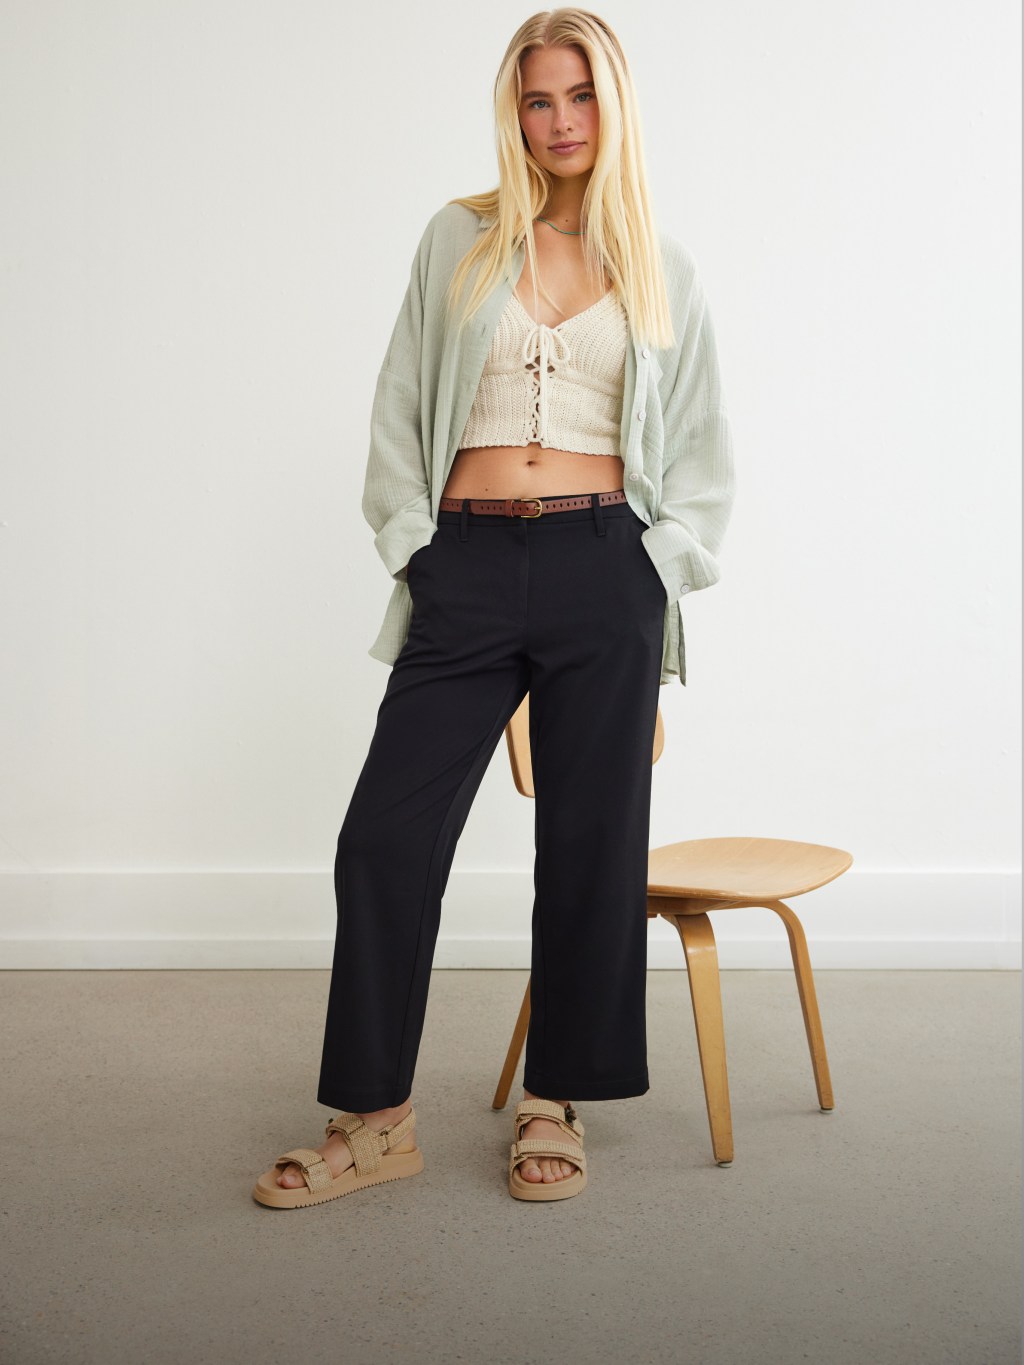 girl with blonde hair wearing a white crop top and black trousers from American Eagle